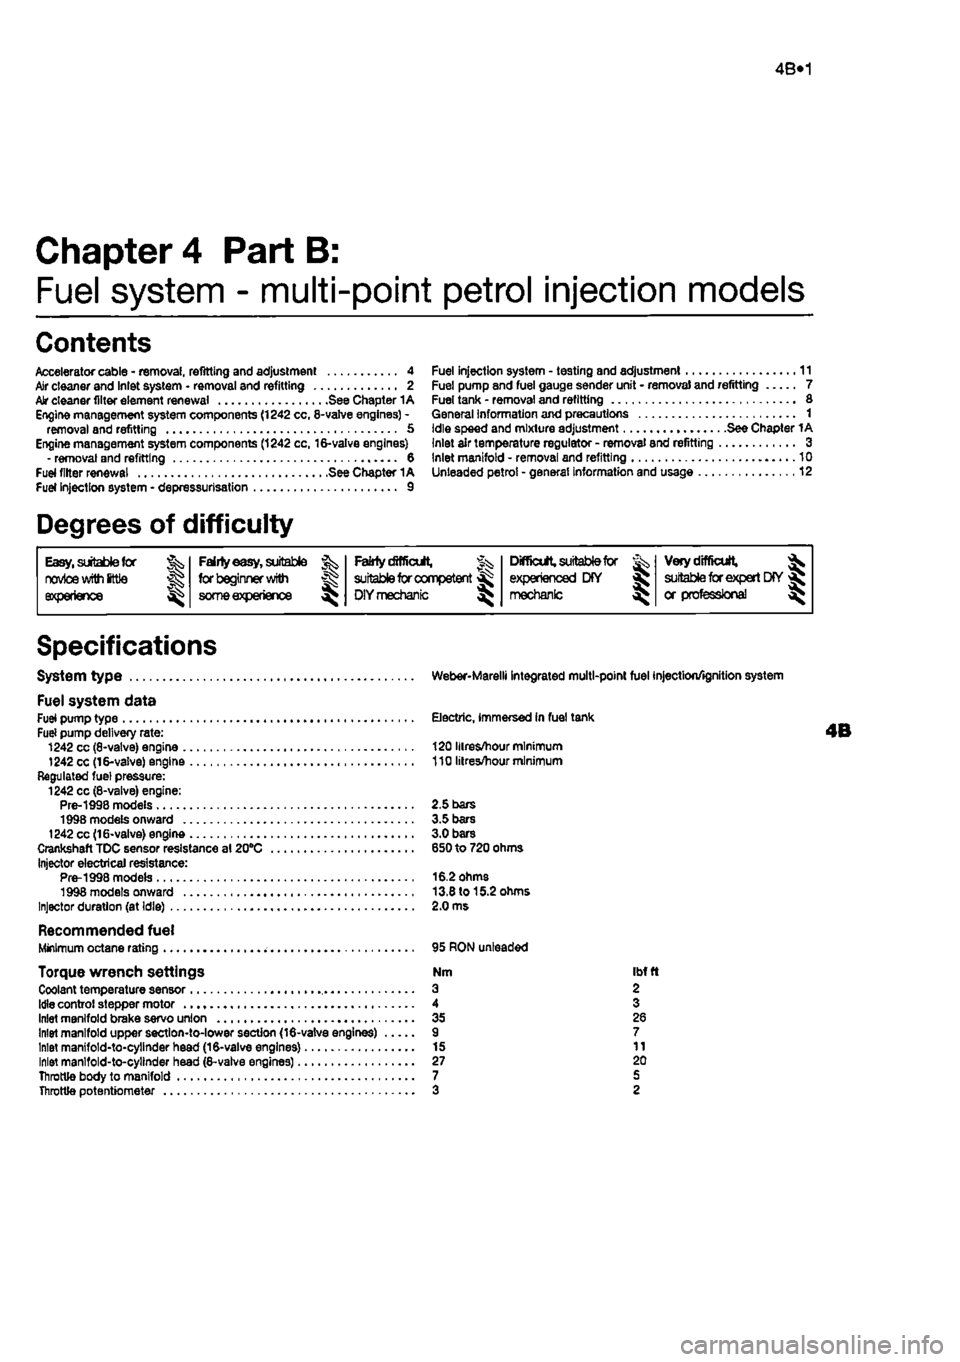 FIAT PUNTO 1996 176 / 1.G Workshop Manual 
4B*1 
Chapter 4 Part B: 
Fuel system - multi-point petrol injection models 
Contents 
Accelerator cable - removal, refitting and adjustment 4 Air cleaner and Inlet system • removal and refitting 2 